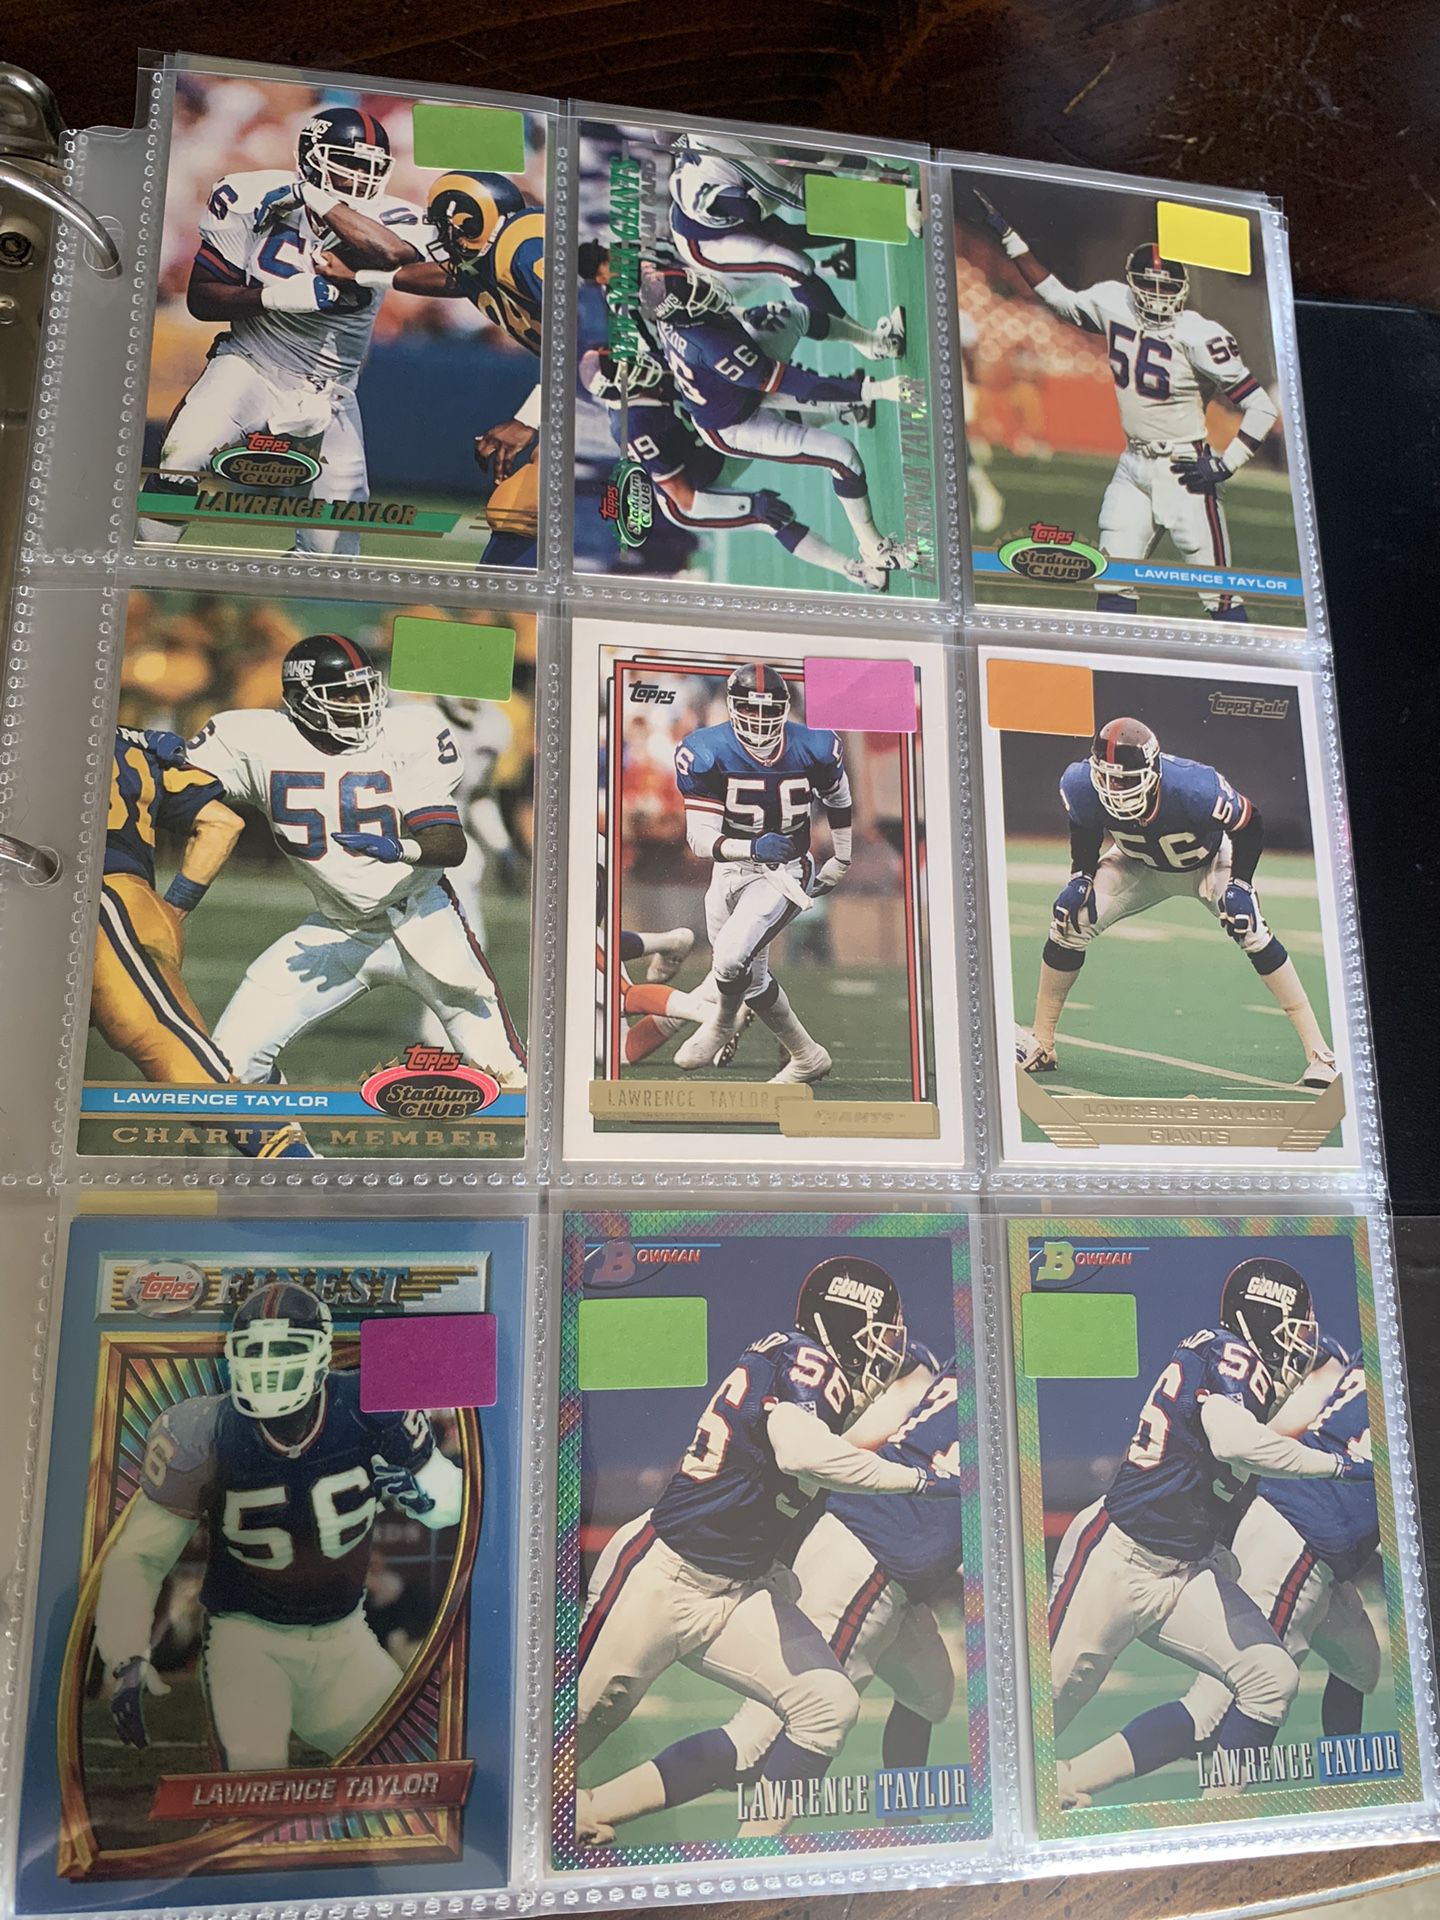 Lawrence Taylor Card Lot (9)